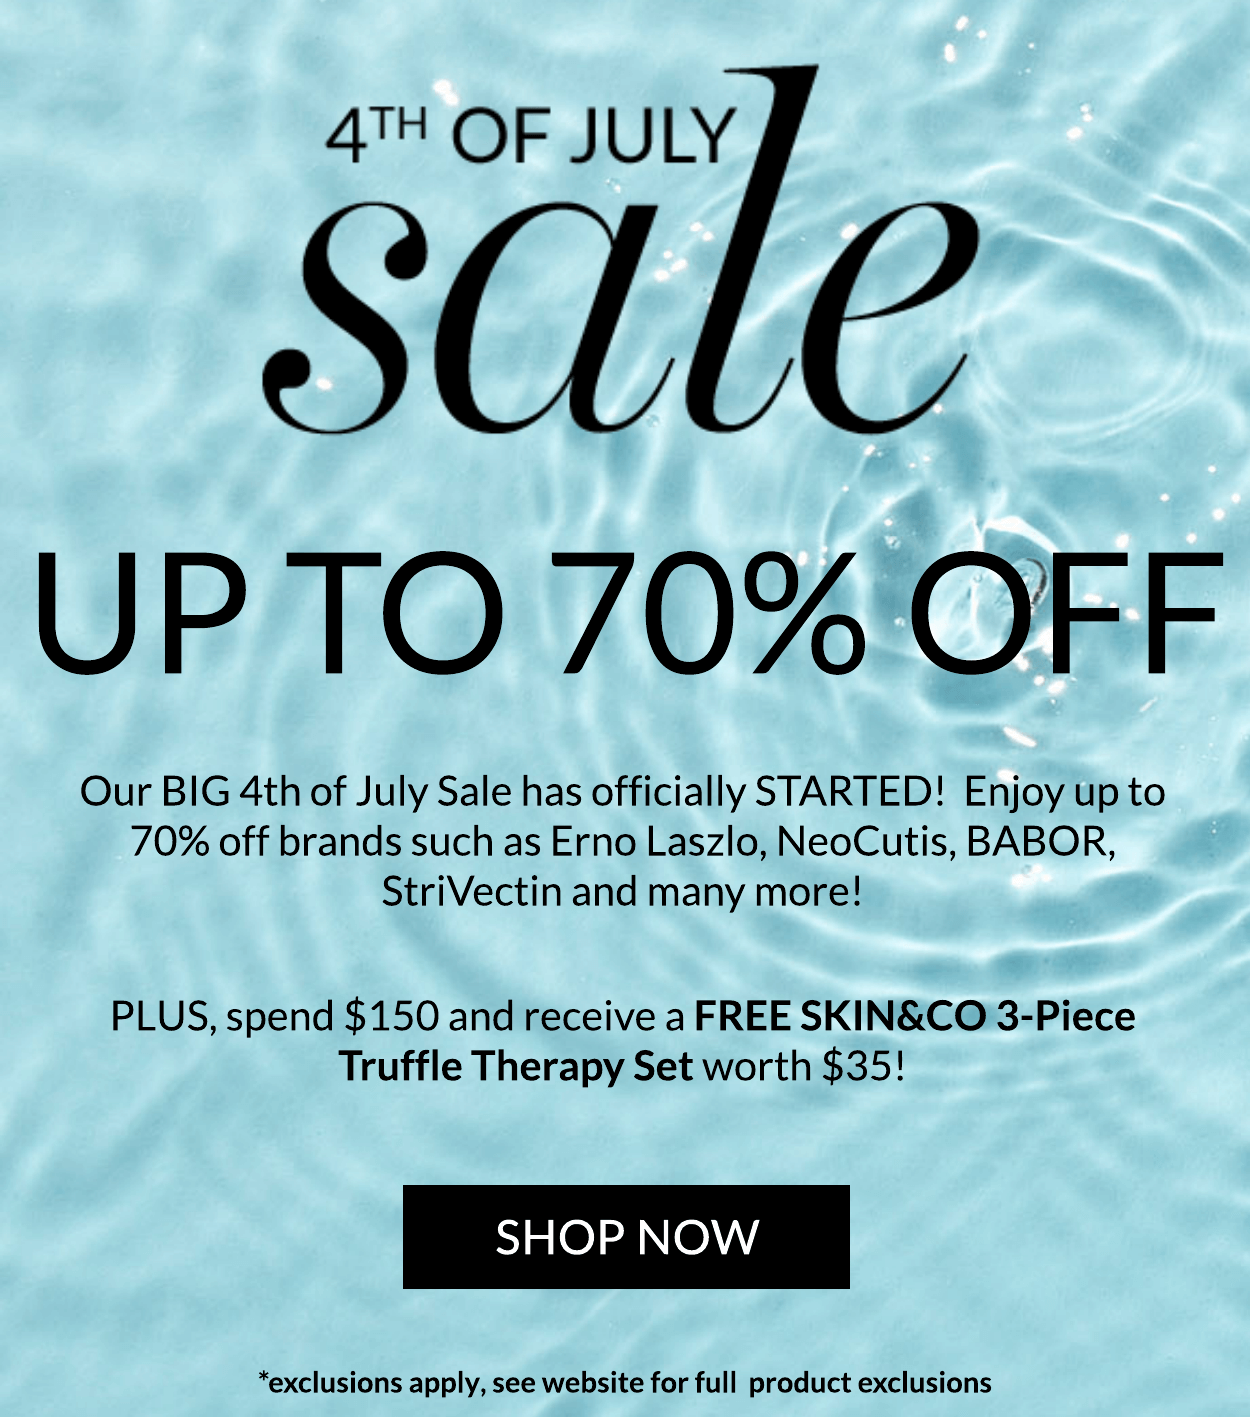 JULY 4TH SALE - UP TO 70% OFF